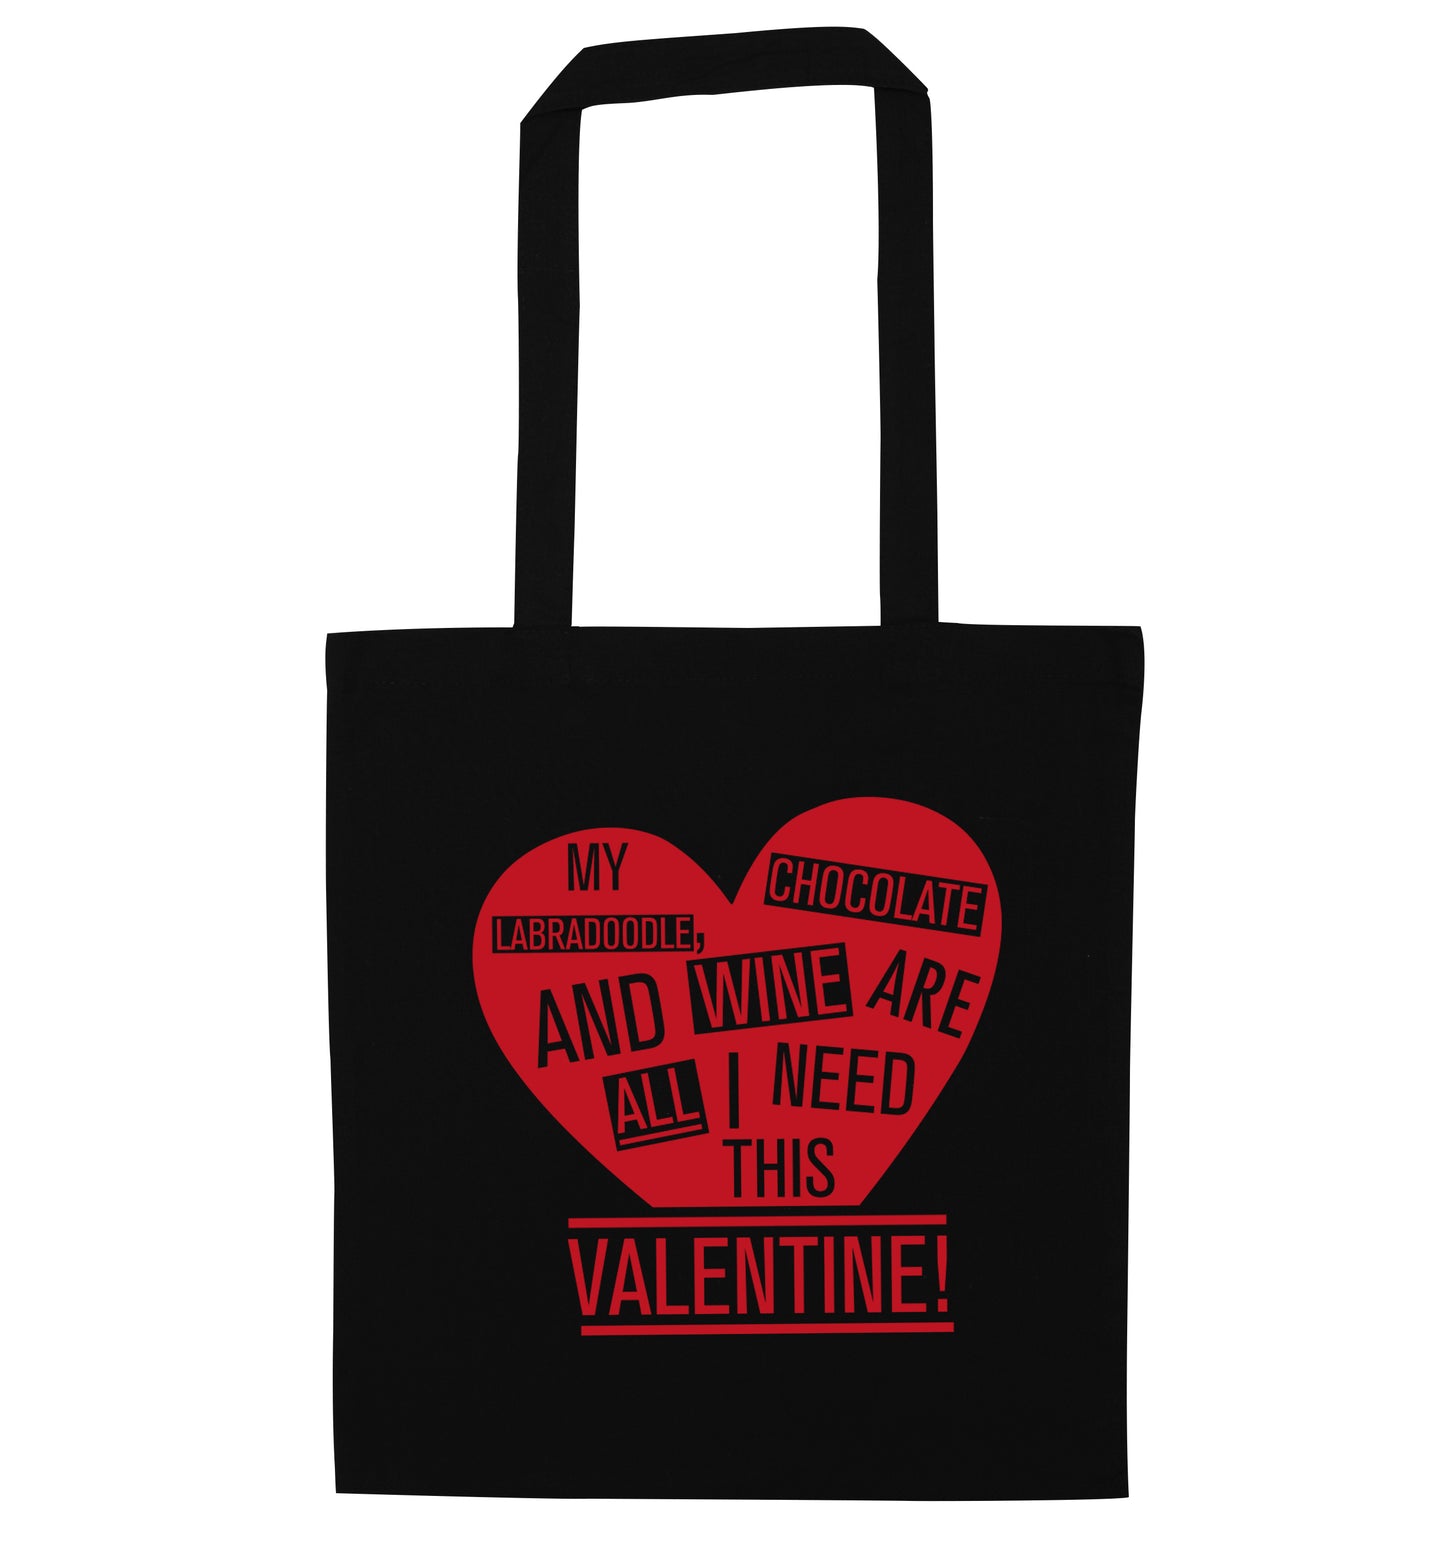 My labradoodle, chocolate and wine are all I need this valentine! black tote bag